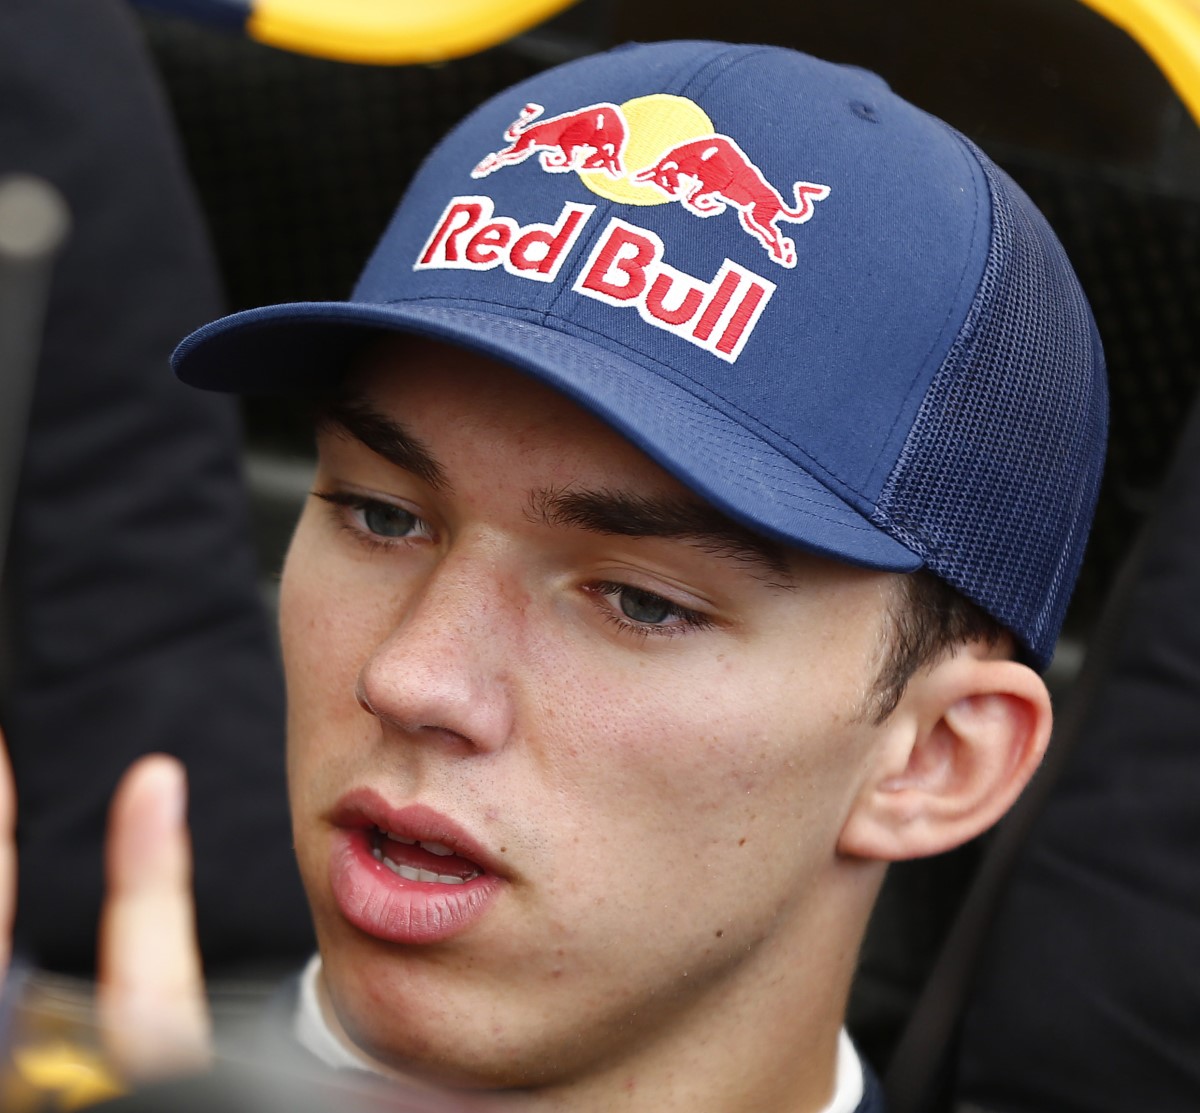 What can't Pierre Gasly understand about needing a Russian driver for the Russian GP?